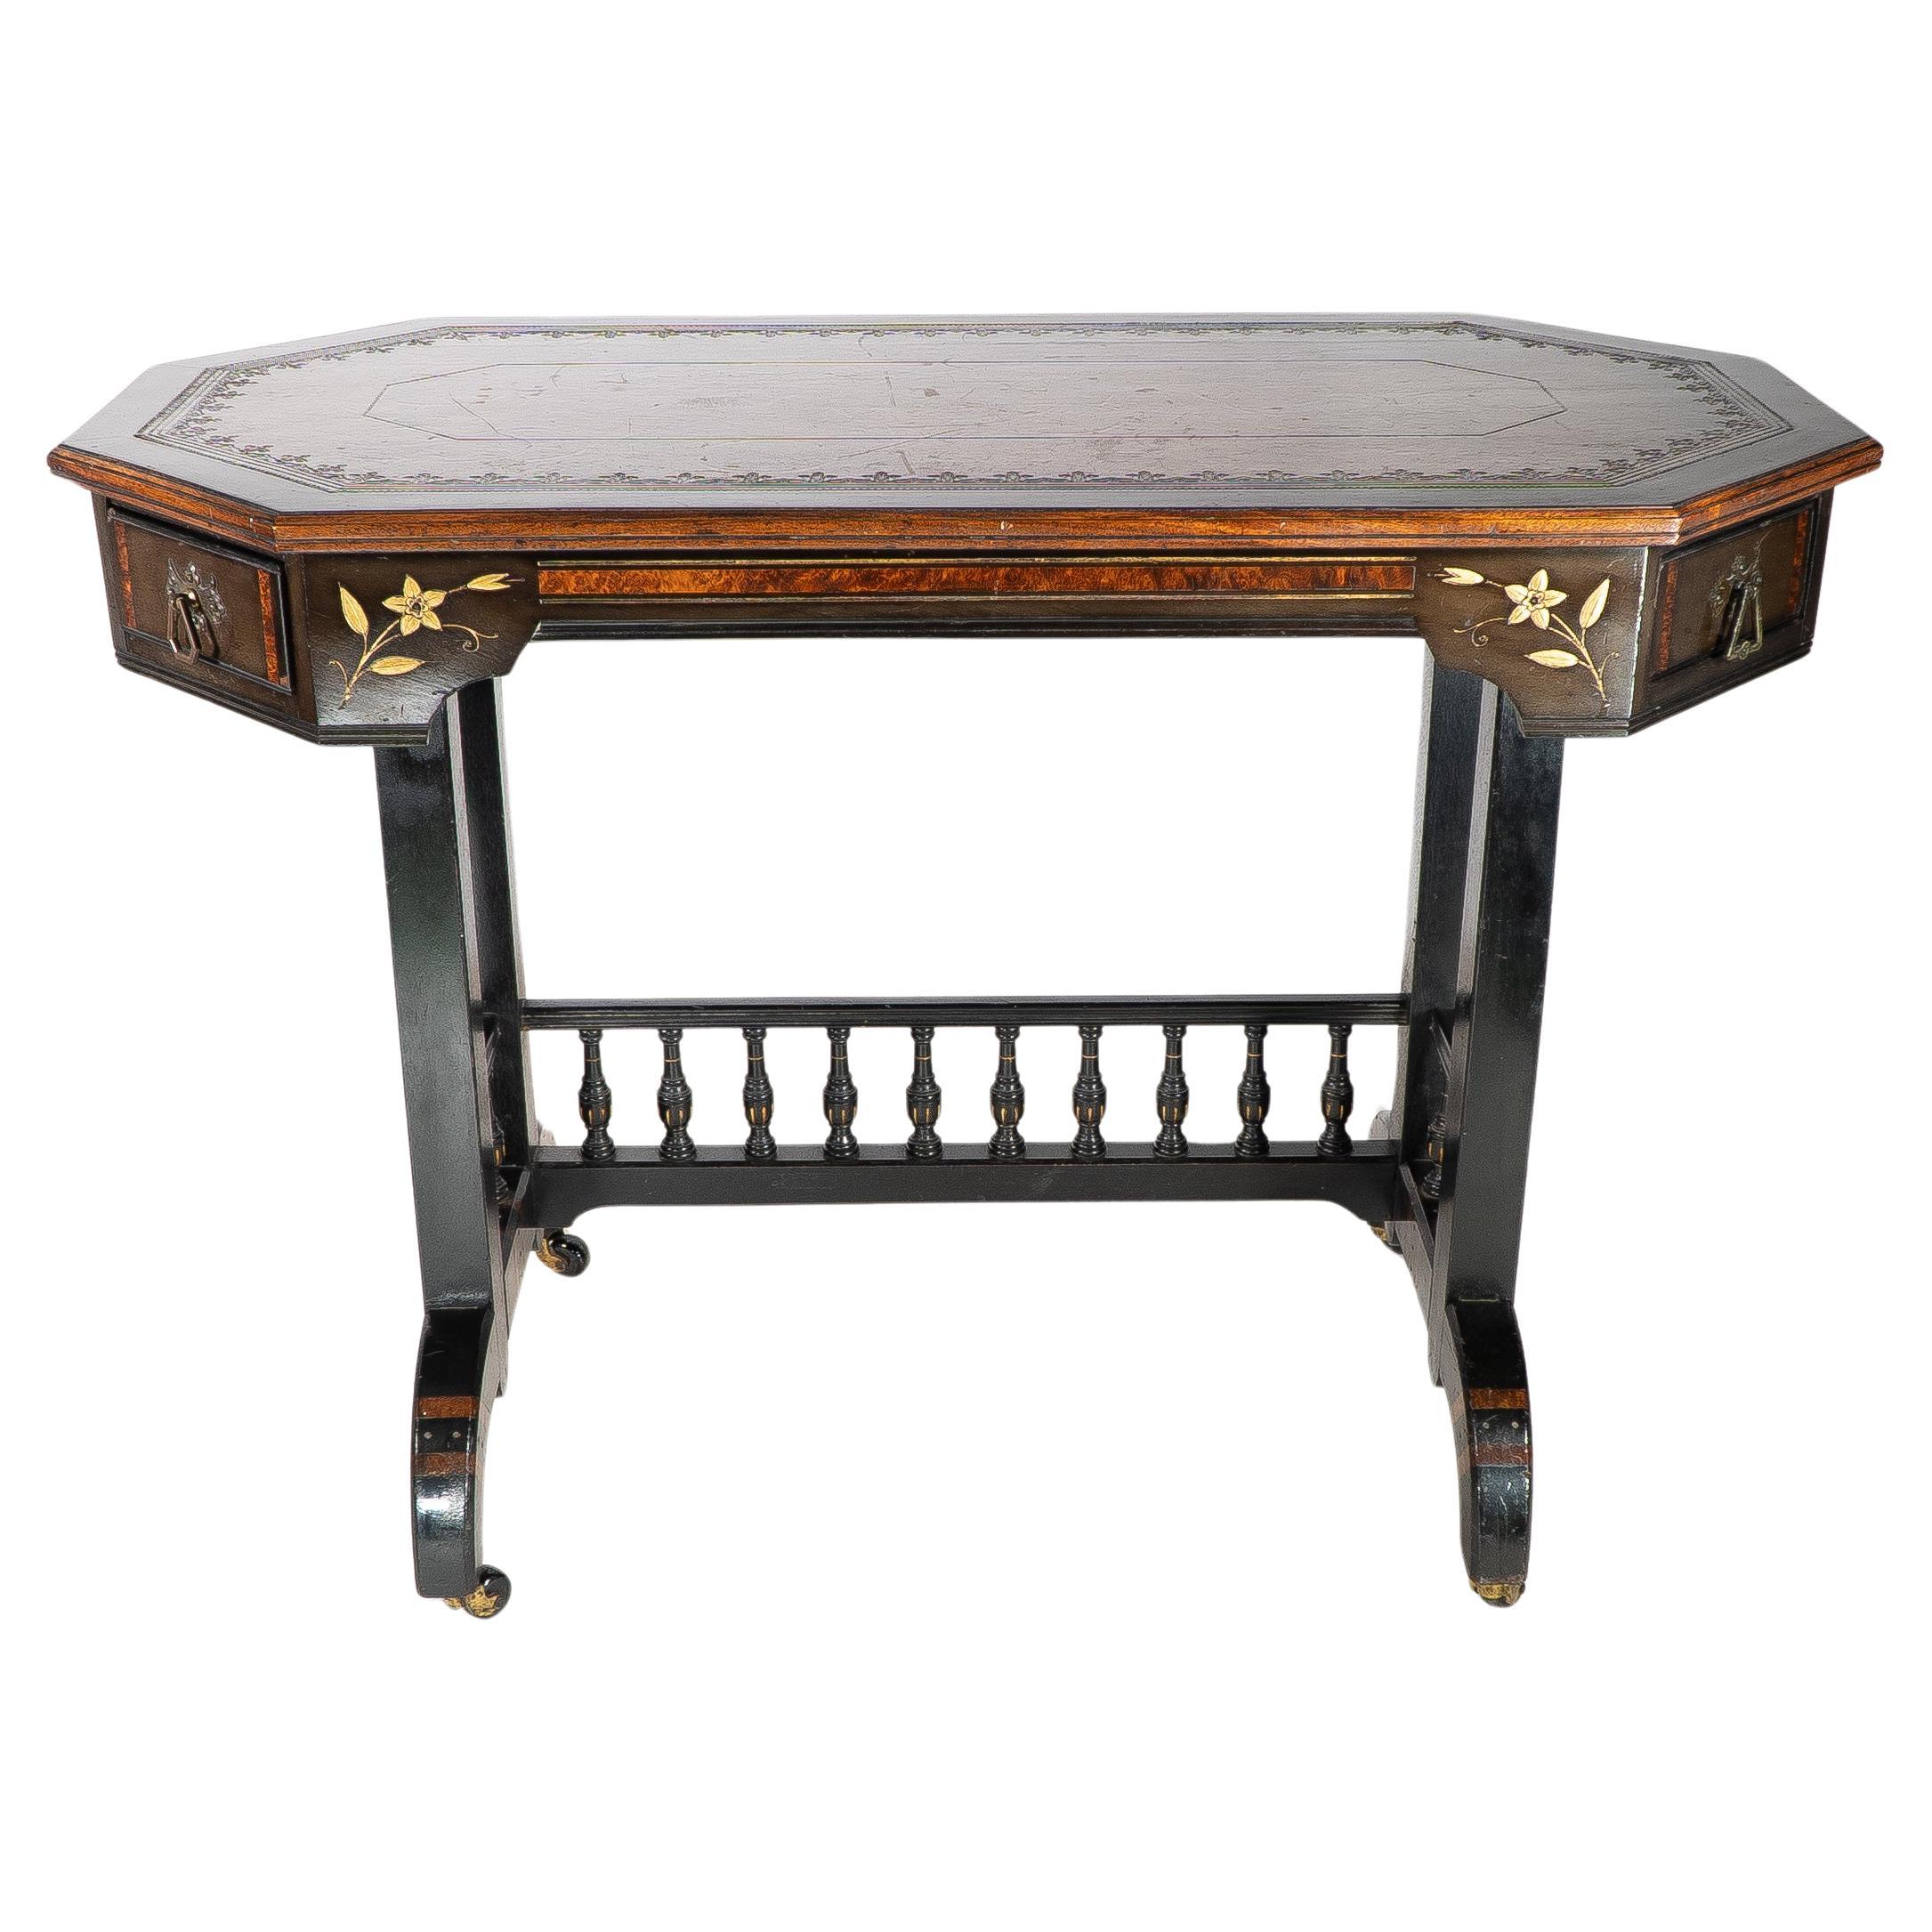 An Aesthetic Movement ebonized and parcel gilt writing desk with cantered corners and incized floral decoration and a tower turned gallery. Stamped David Waddington Ulphosterer Bolton on both drawers.
